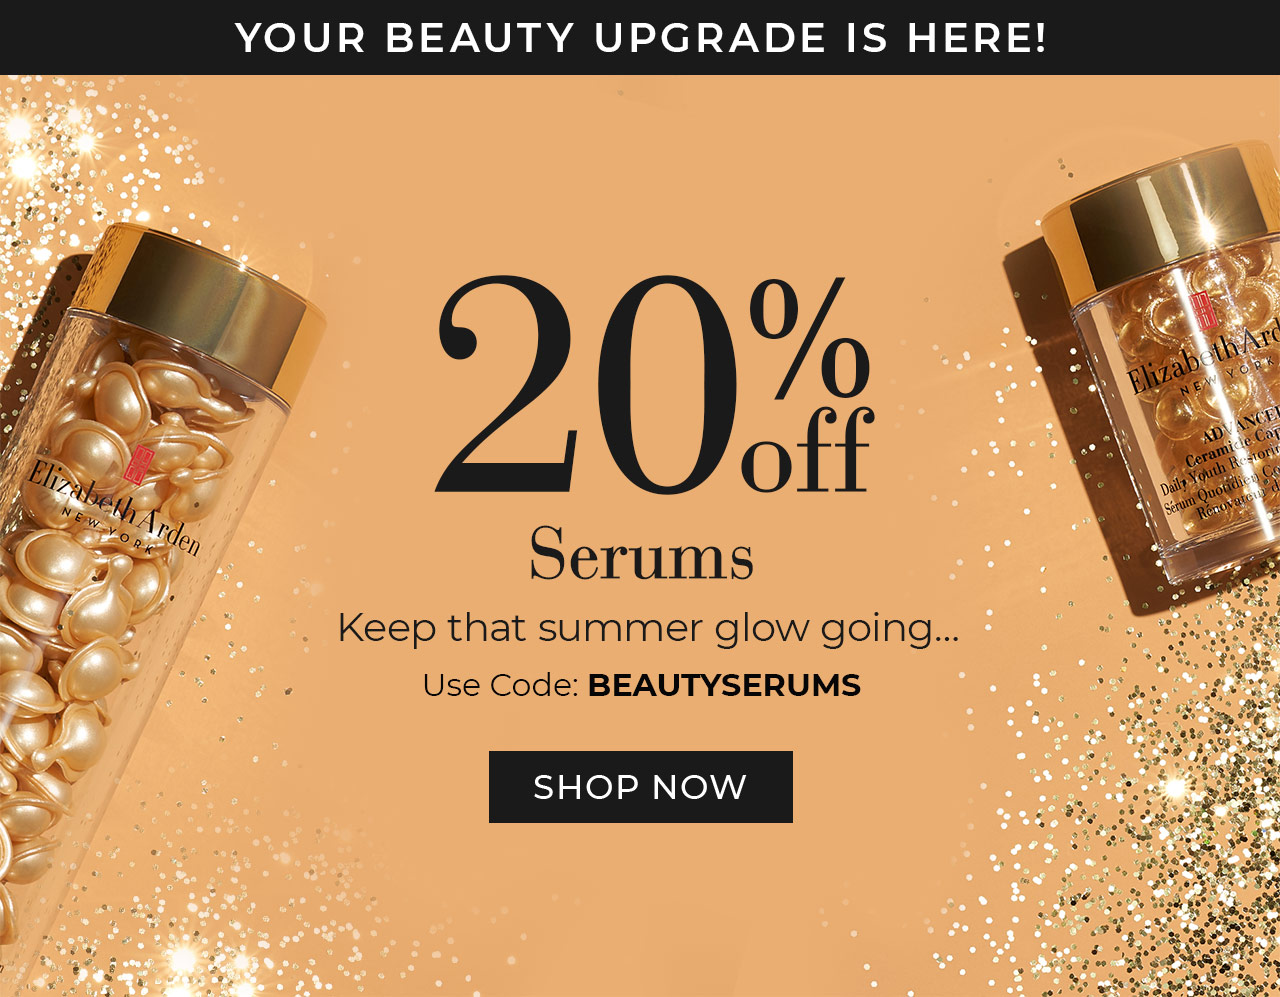 Your Beauty Upgrade is Here! | 20% Off Serums | Keep that summer glow going... | Use Code: BEAUTYSERUMS | SHOP NOW